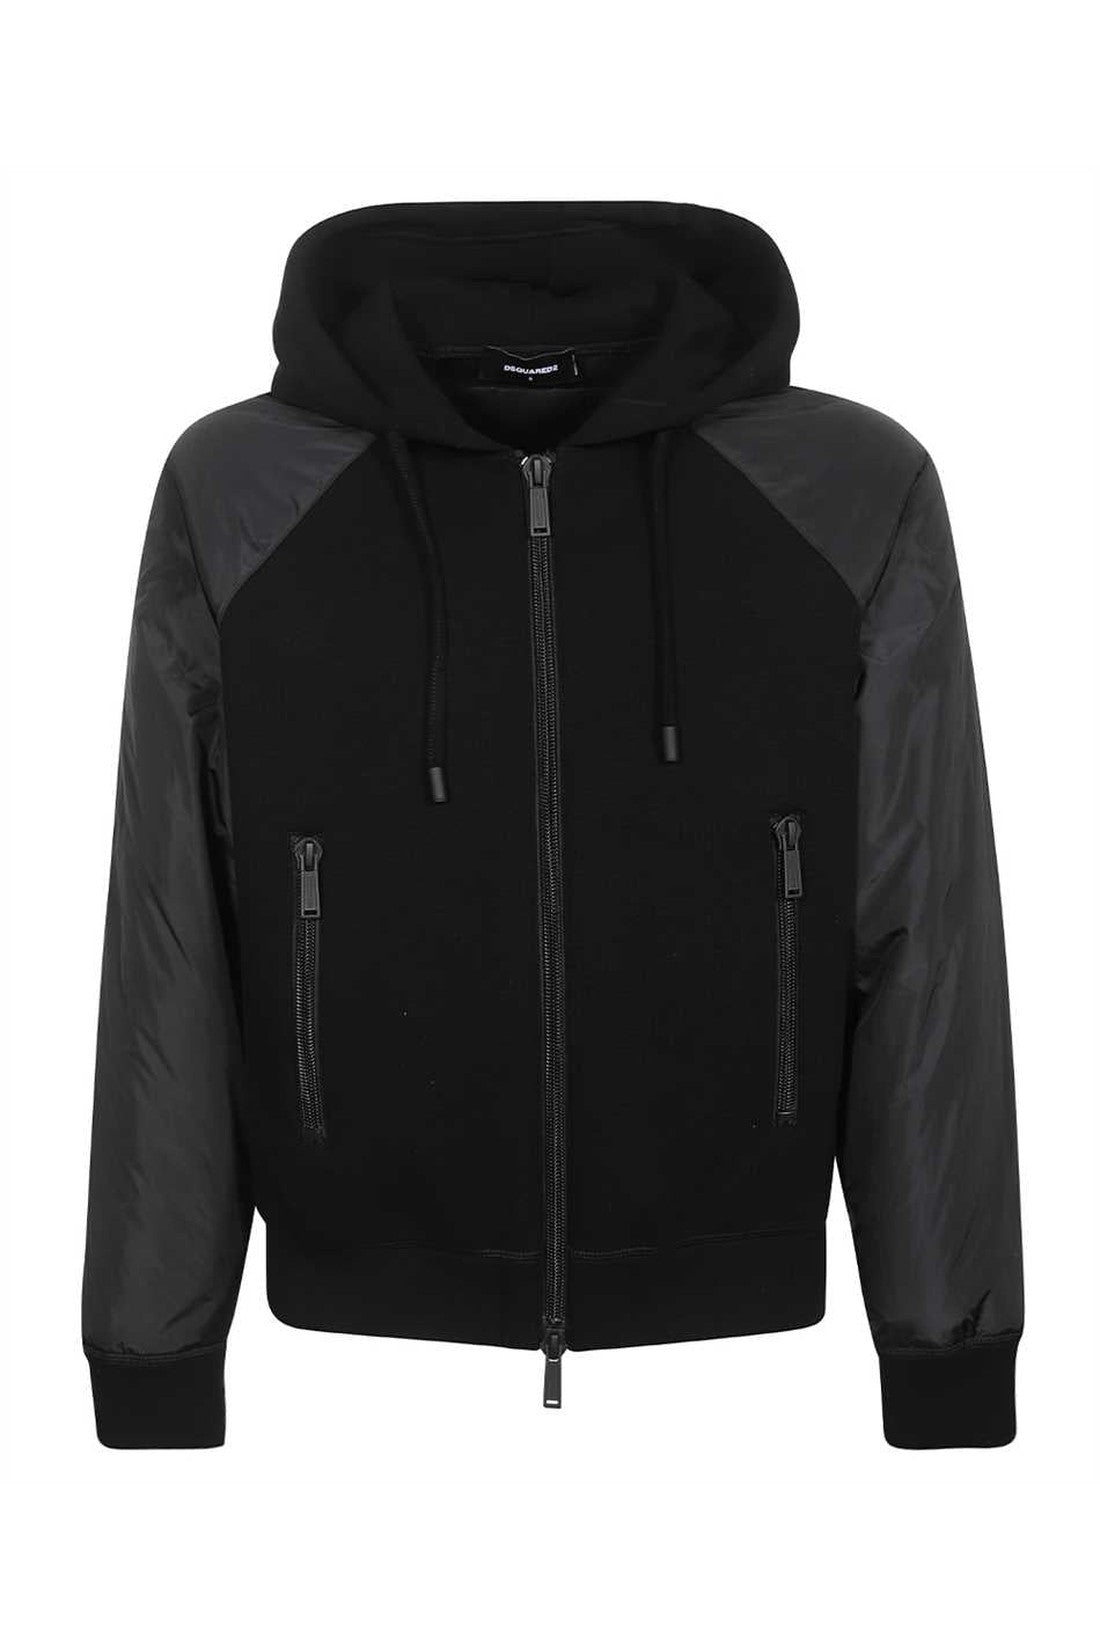 Dsquared2-OUTLET-SALE-Ibra knitted bomber jacket-ARCHIVIST